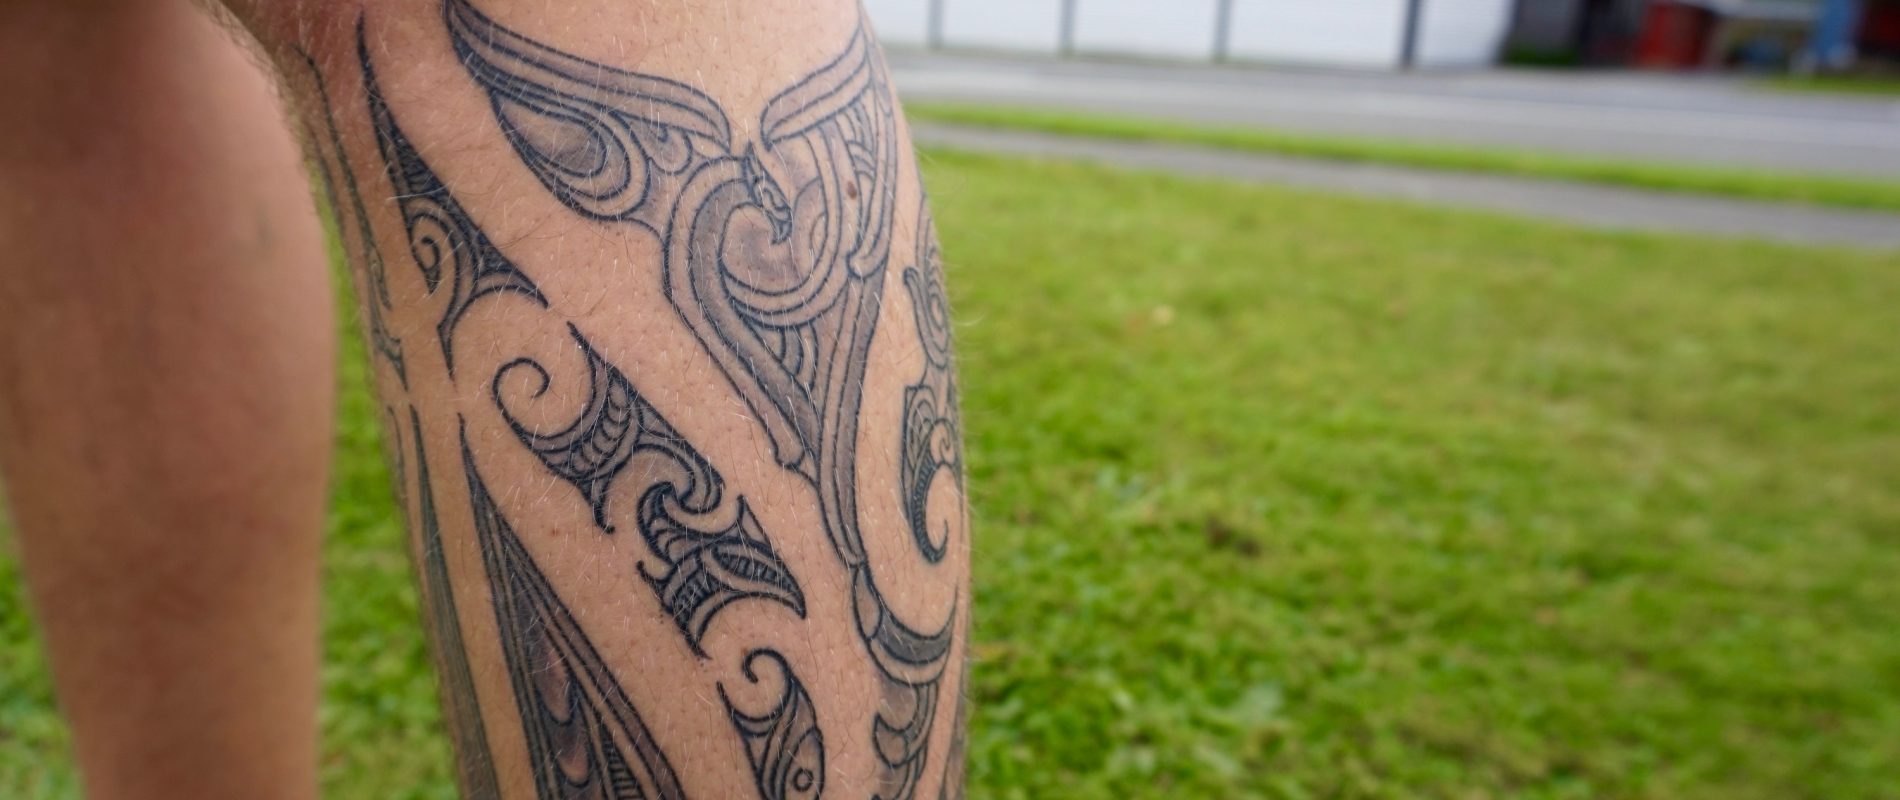 Set Of Tattoo Sketch Maori Style For Leg Or Shoulder Stock Illustration -  Download Image Now - iStock